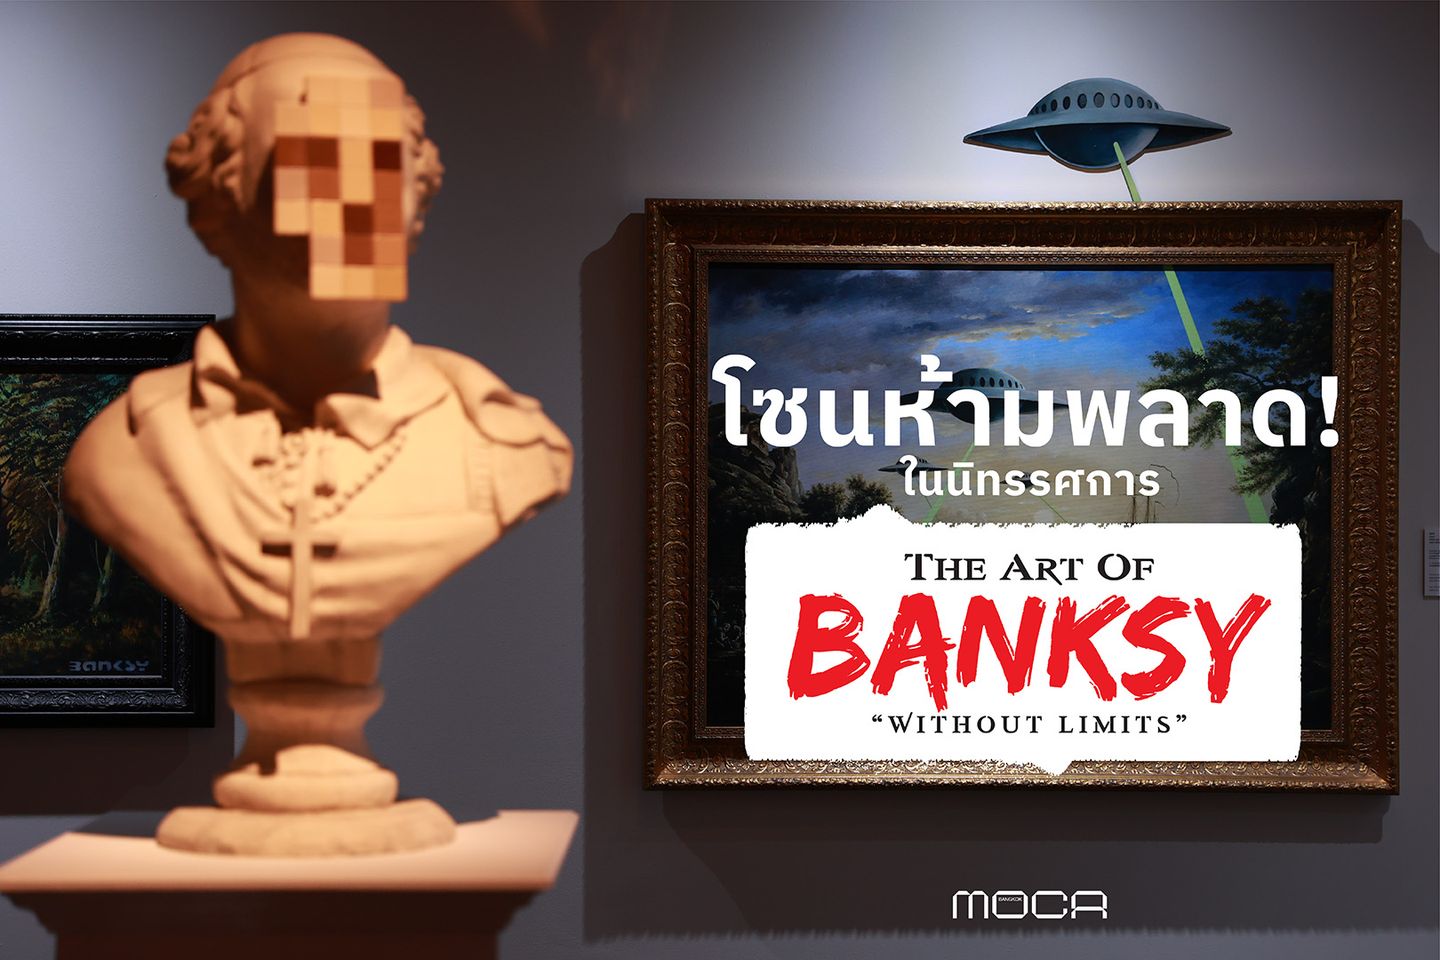 exposition Banksy